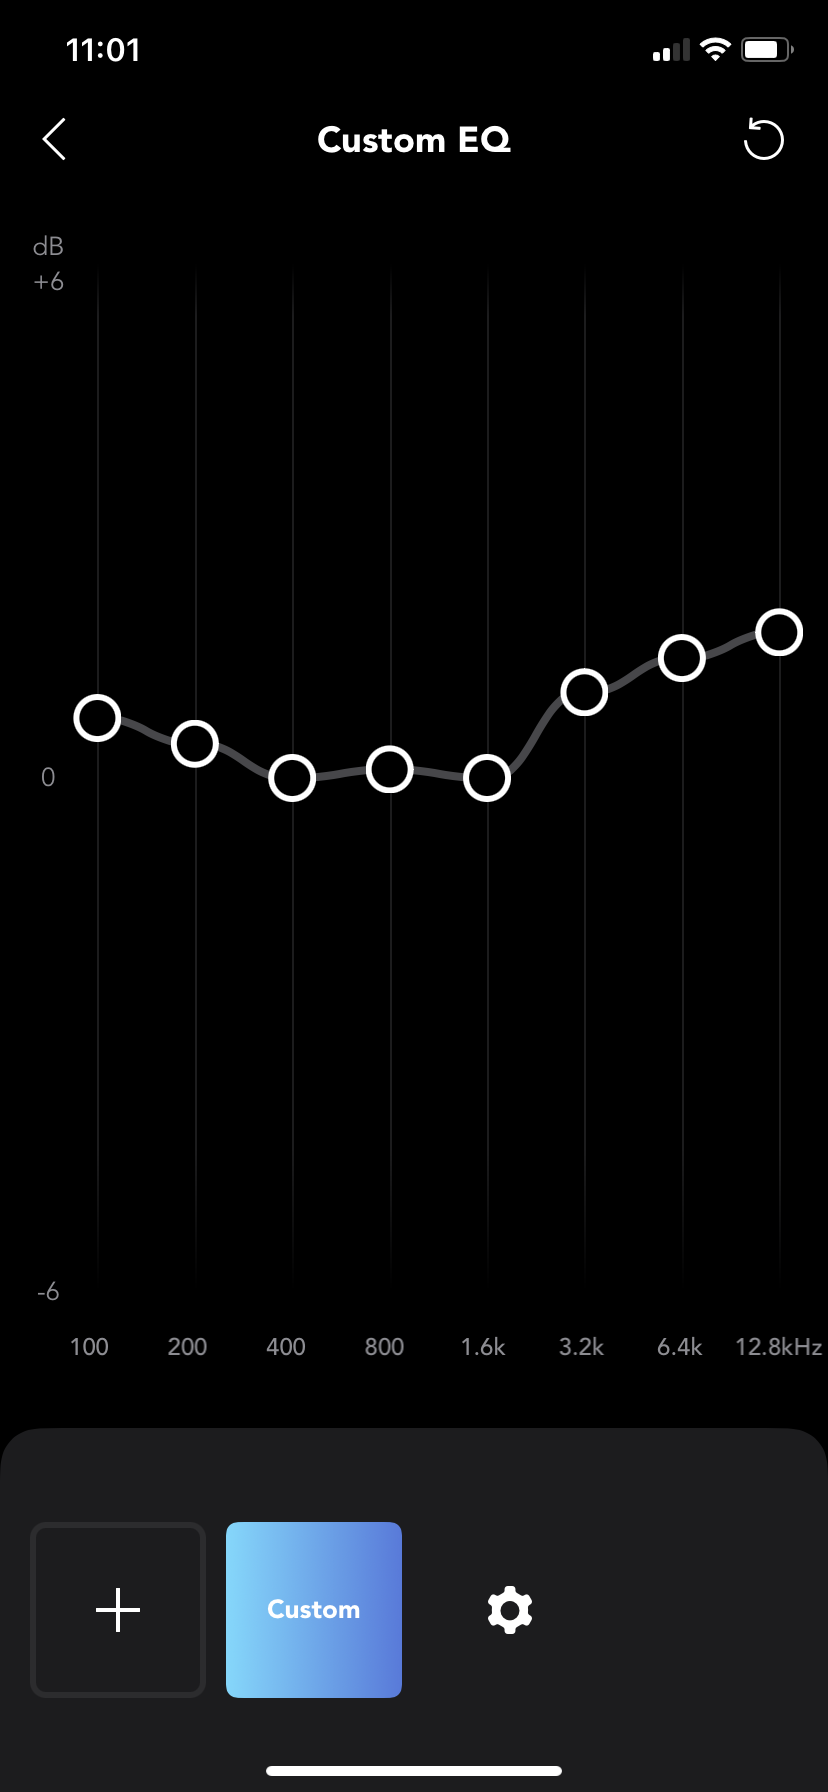 A screenshot of the Soundcore app showing the custom equalizer.